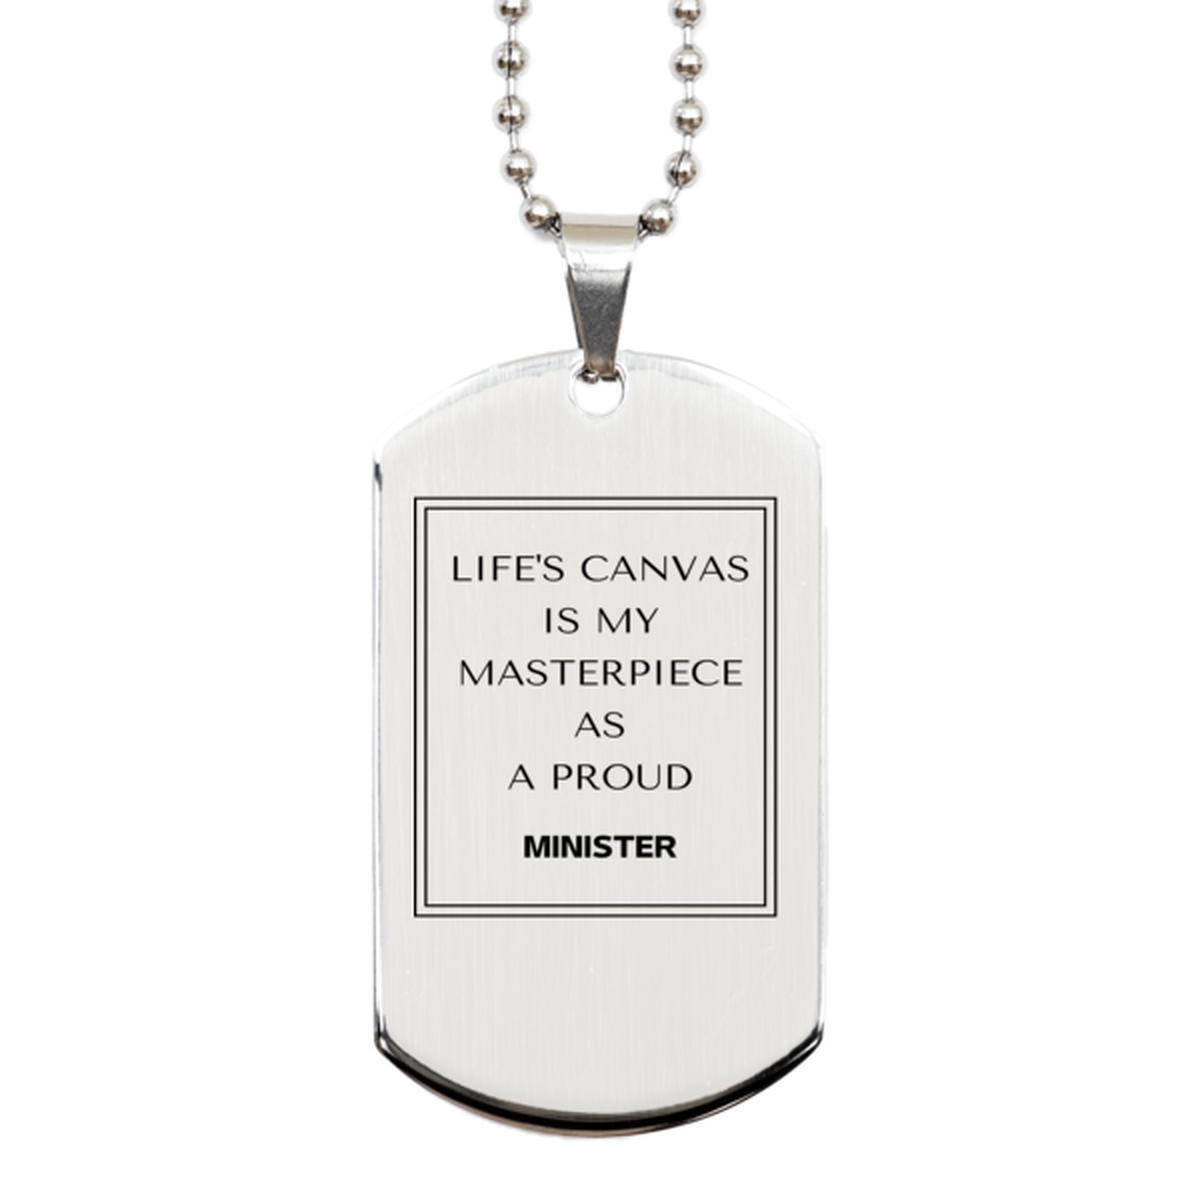 Proud Minister Gifts, Life's canvas is my masterpiece, Epic Birthday Christmas Unique Silver Dog Tag For Minister, Coworkers, Men, Women, Friends